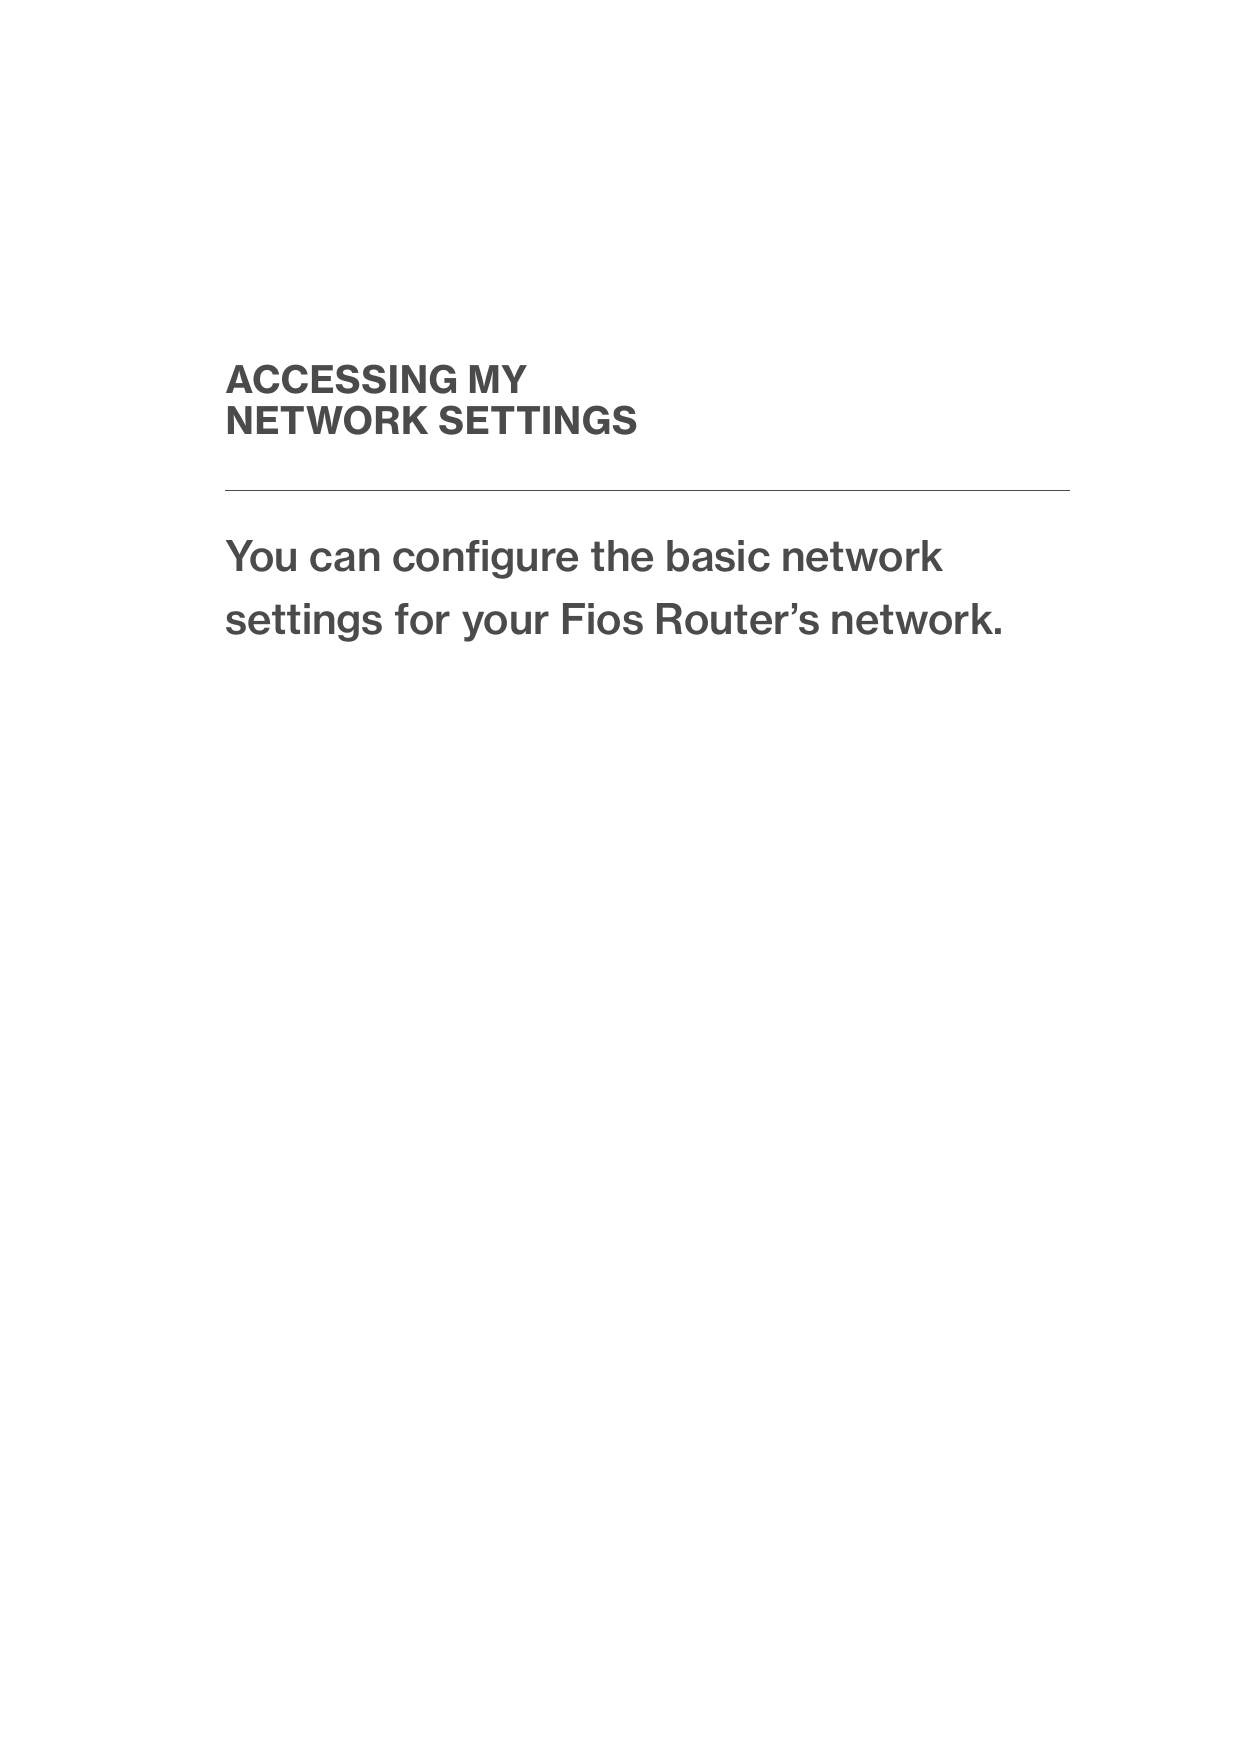 You can conﬁgure the basic network settings for your Fios Router’s network.ACCESSING MY  NETWORK SETTINGS